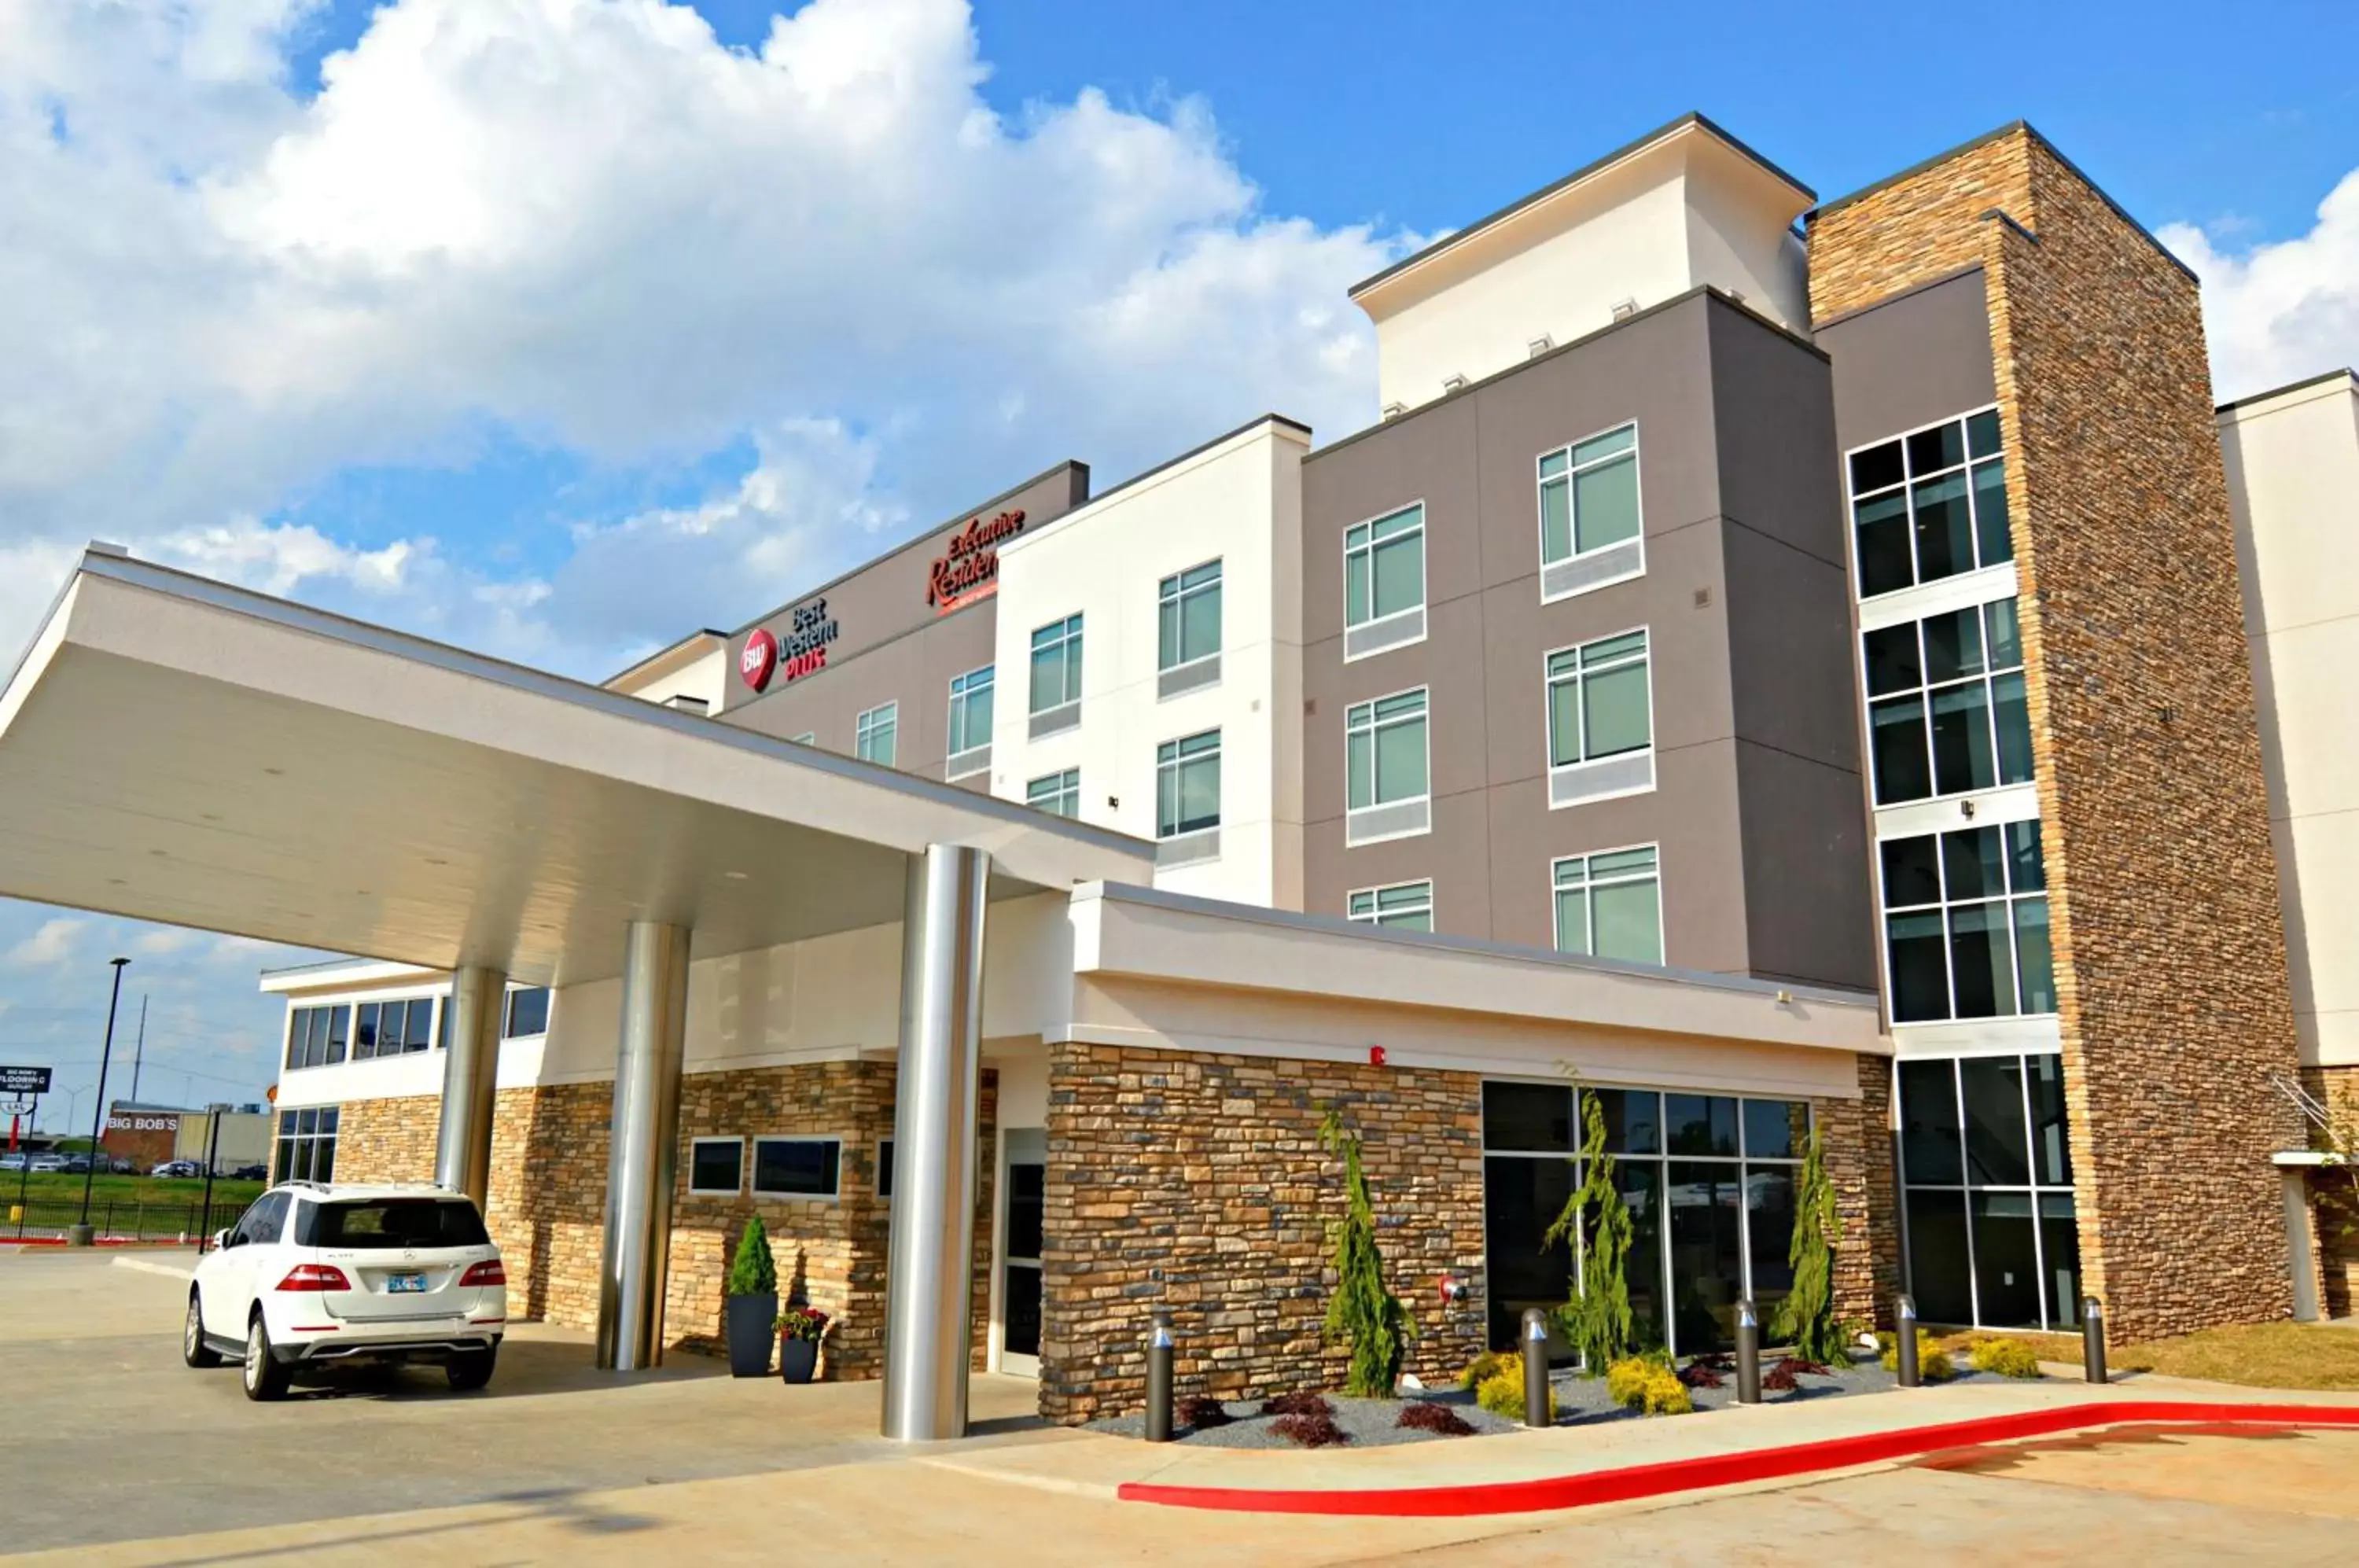 Property building in Best Western Plus Executive Residency Oklahoma City I-35